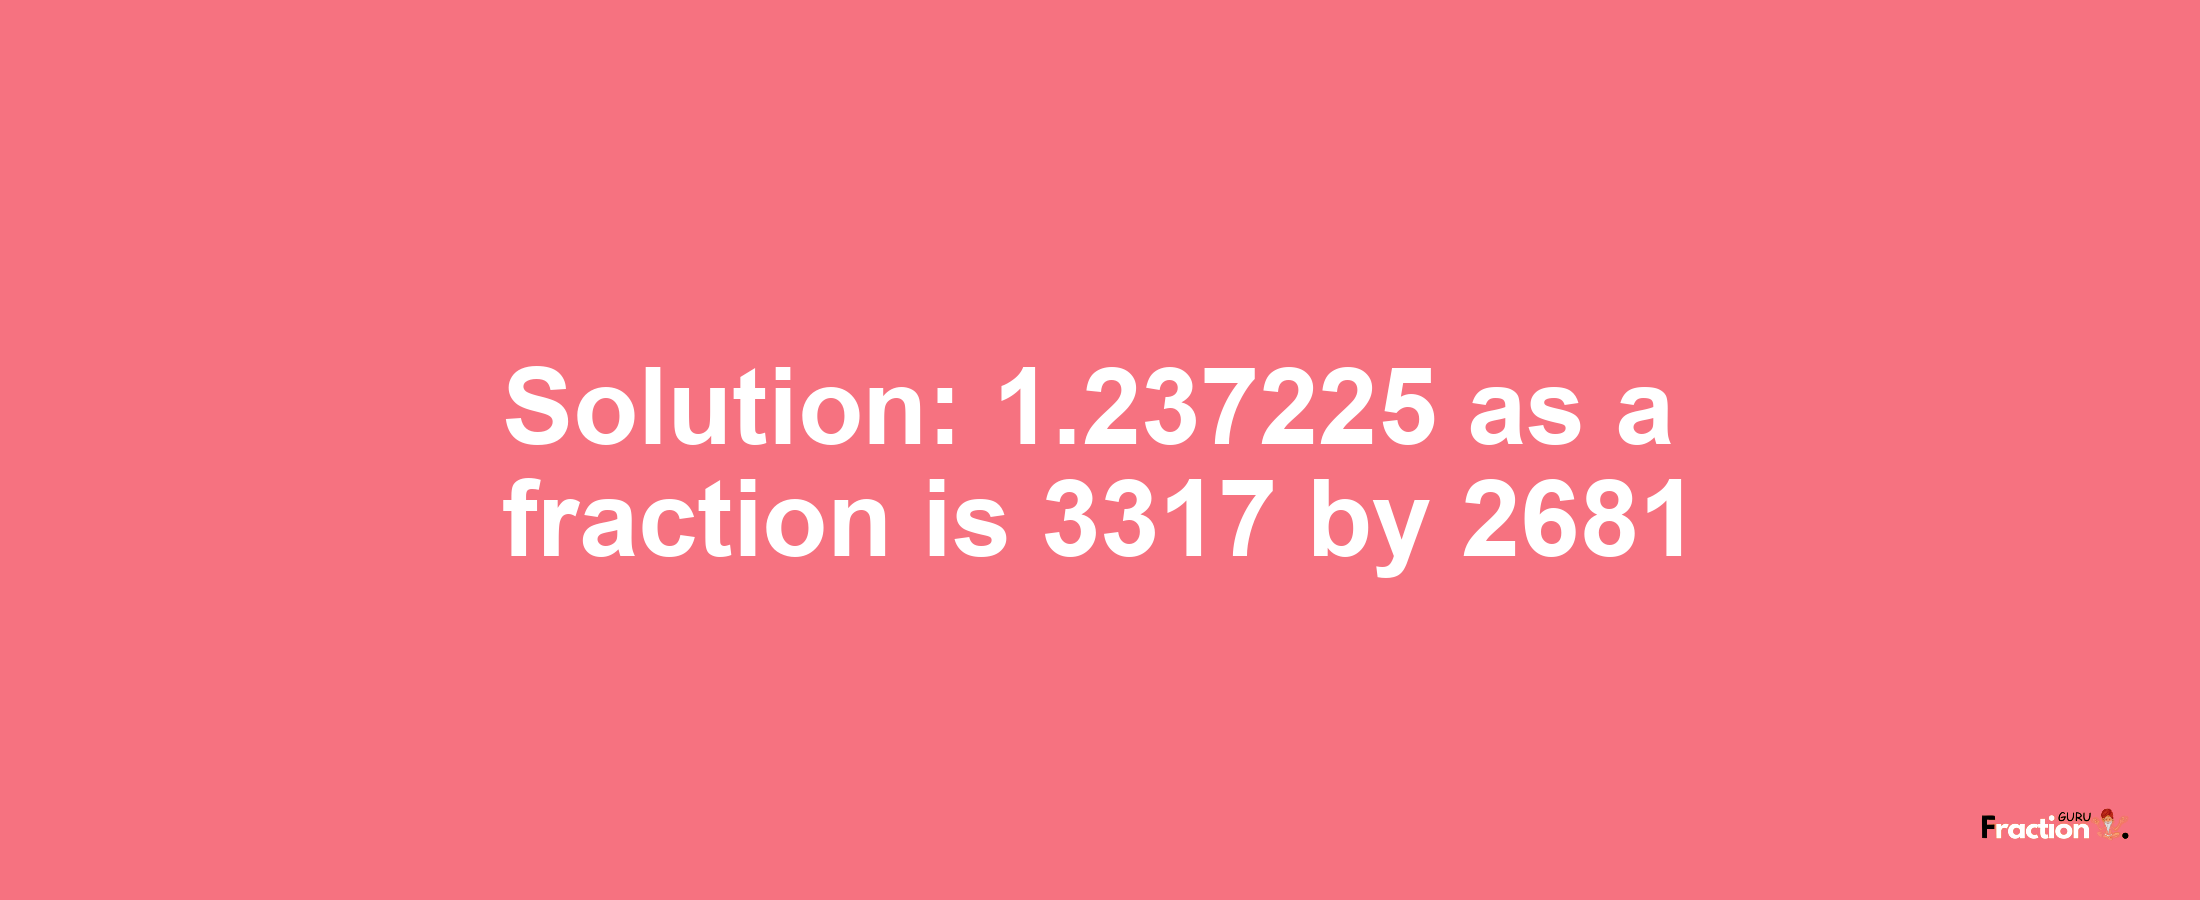 Solution:1.237225 as a fraction is 3317/2681